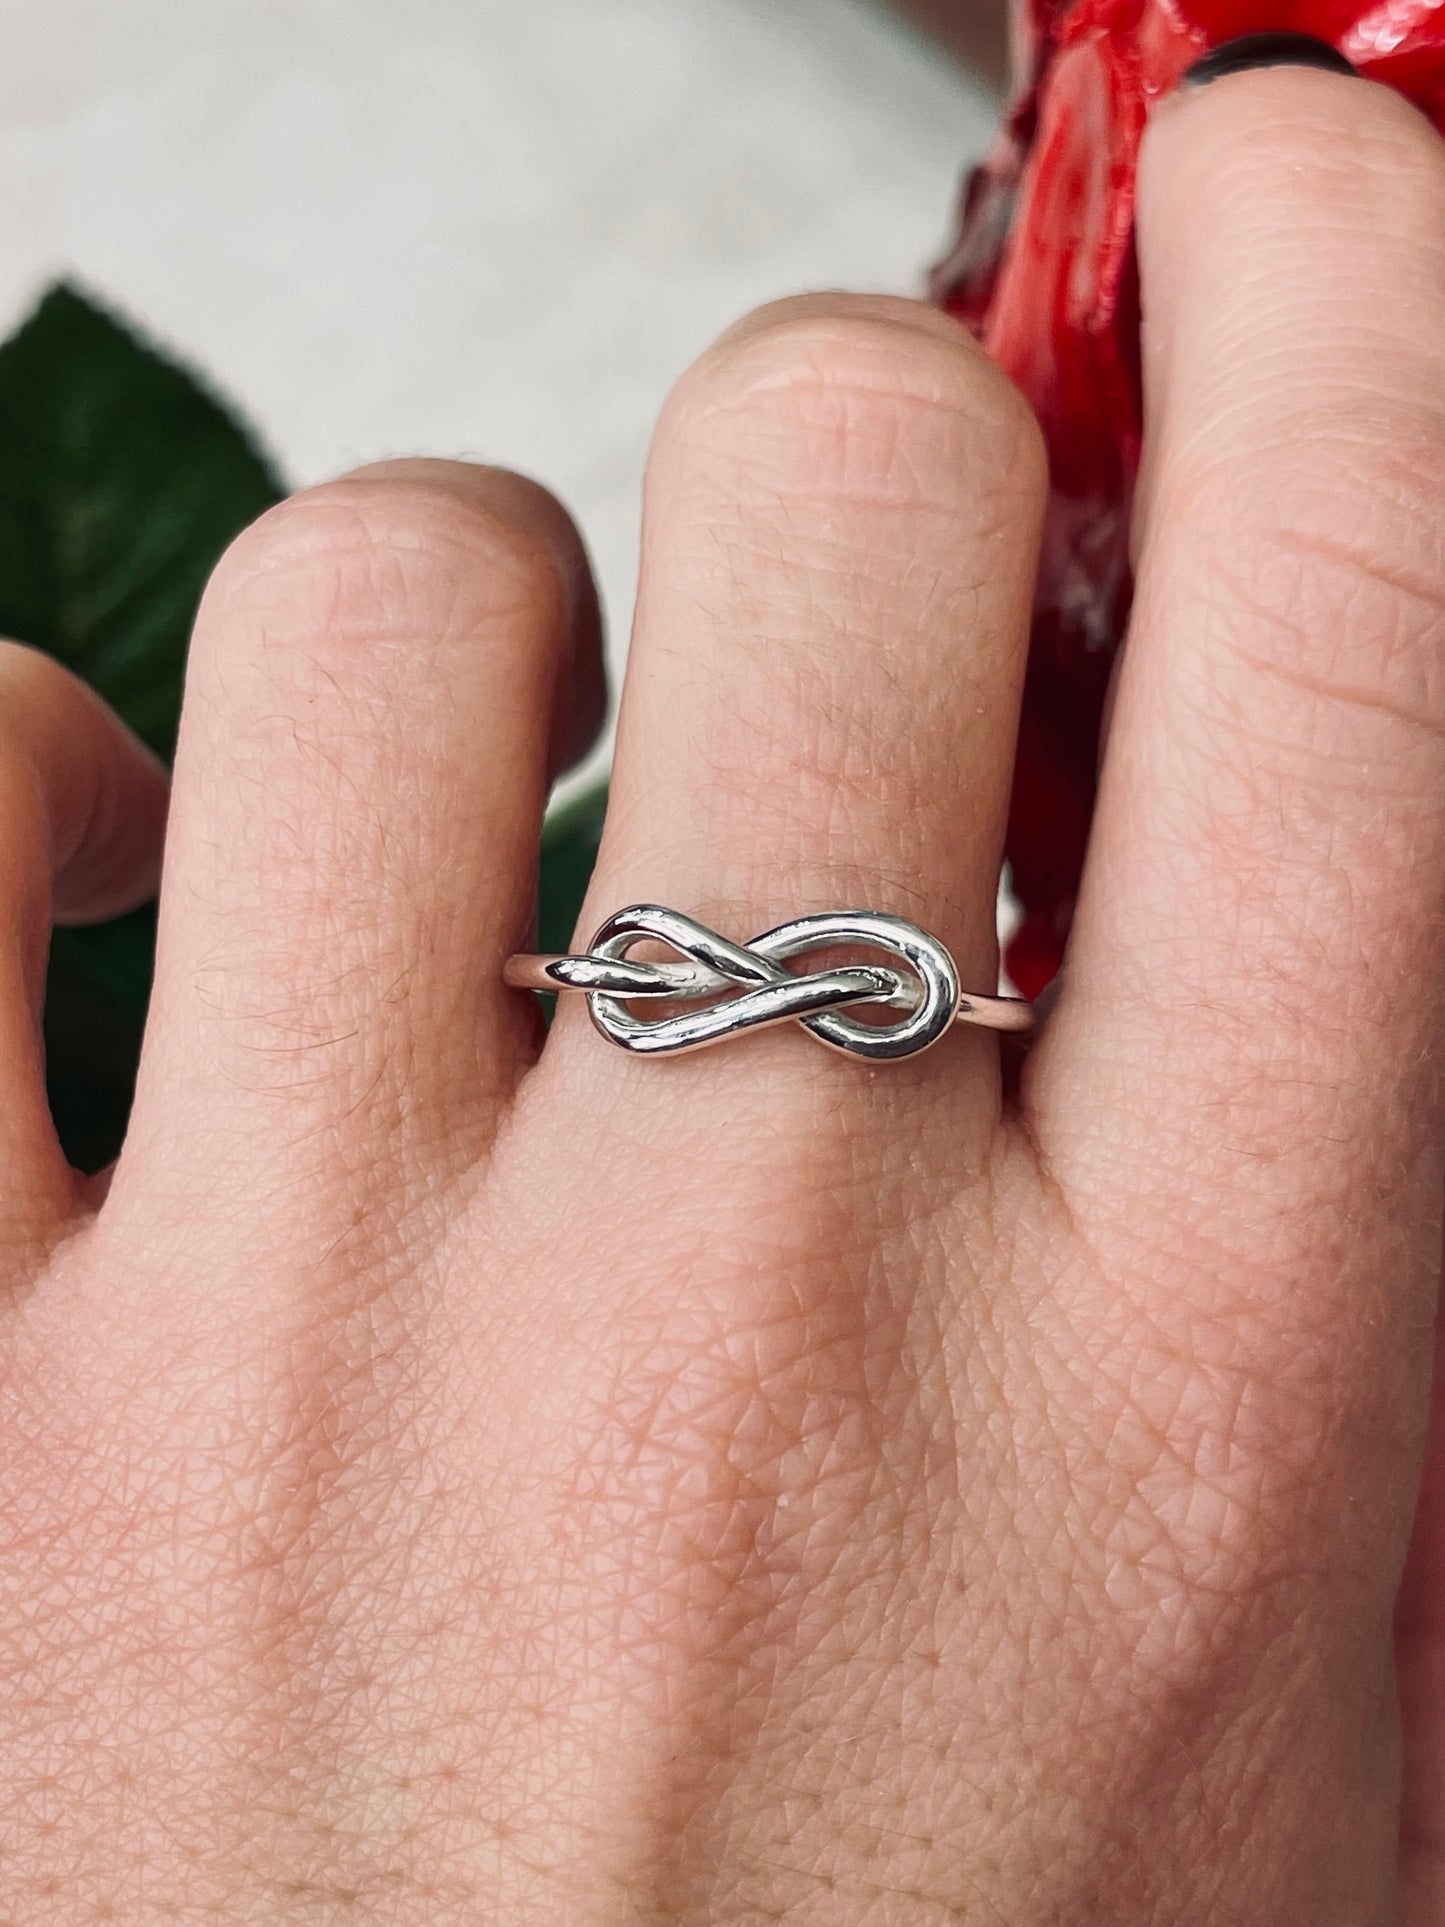 Small Savoy Knot ring